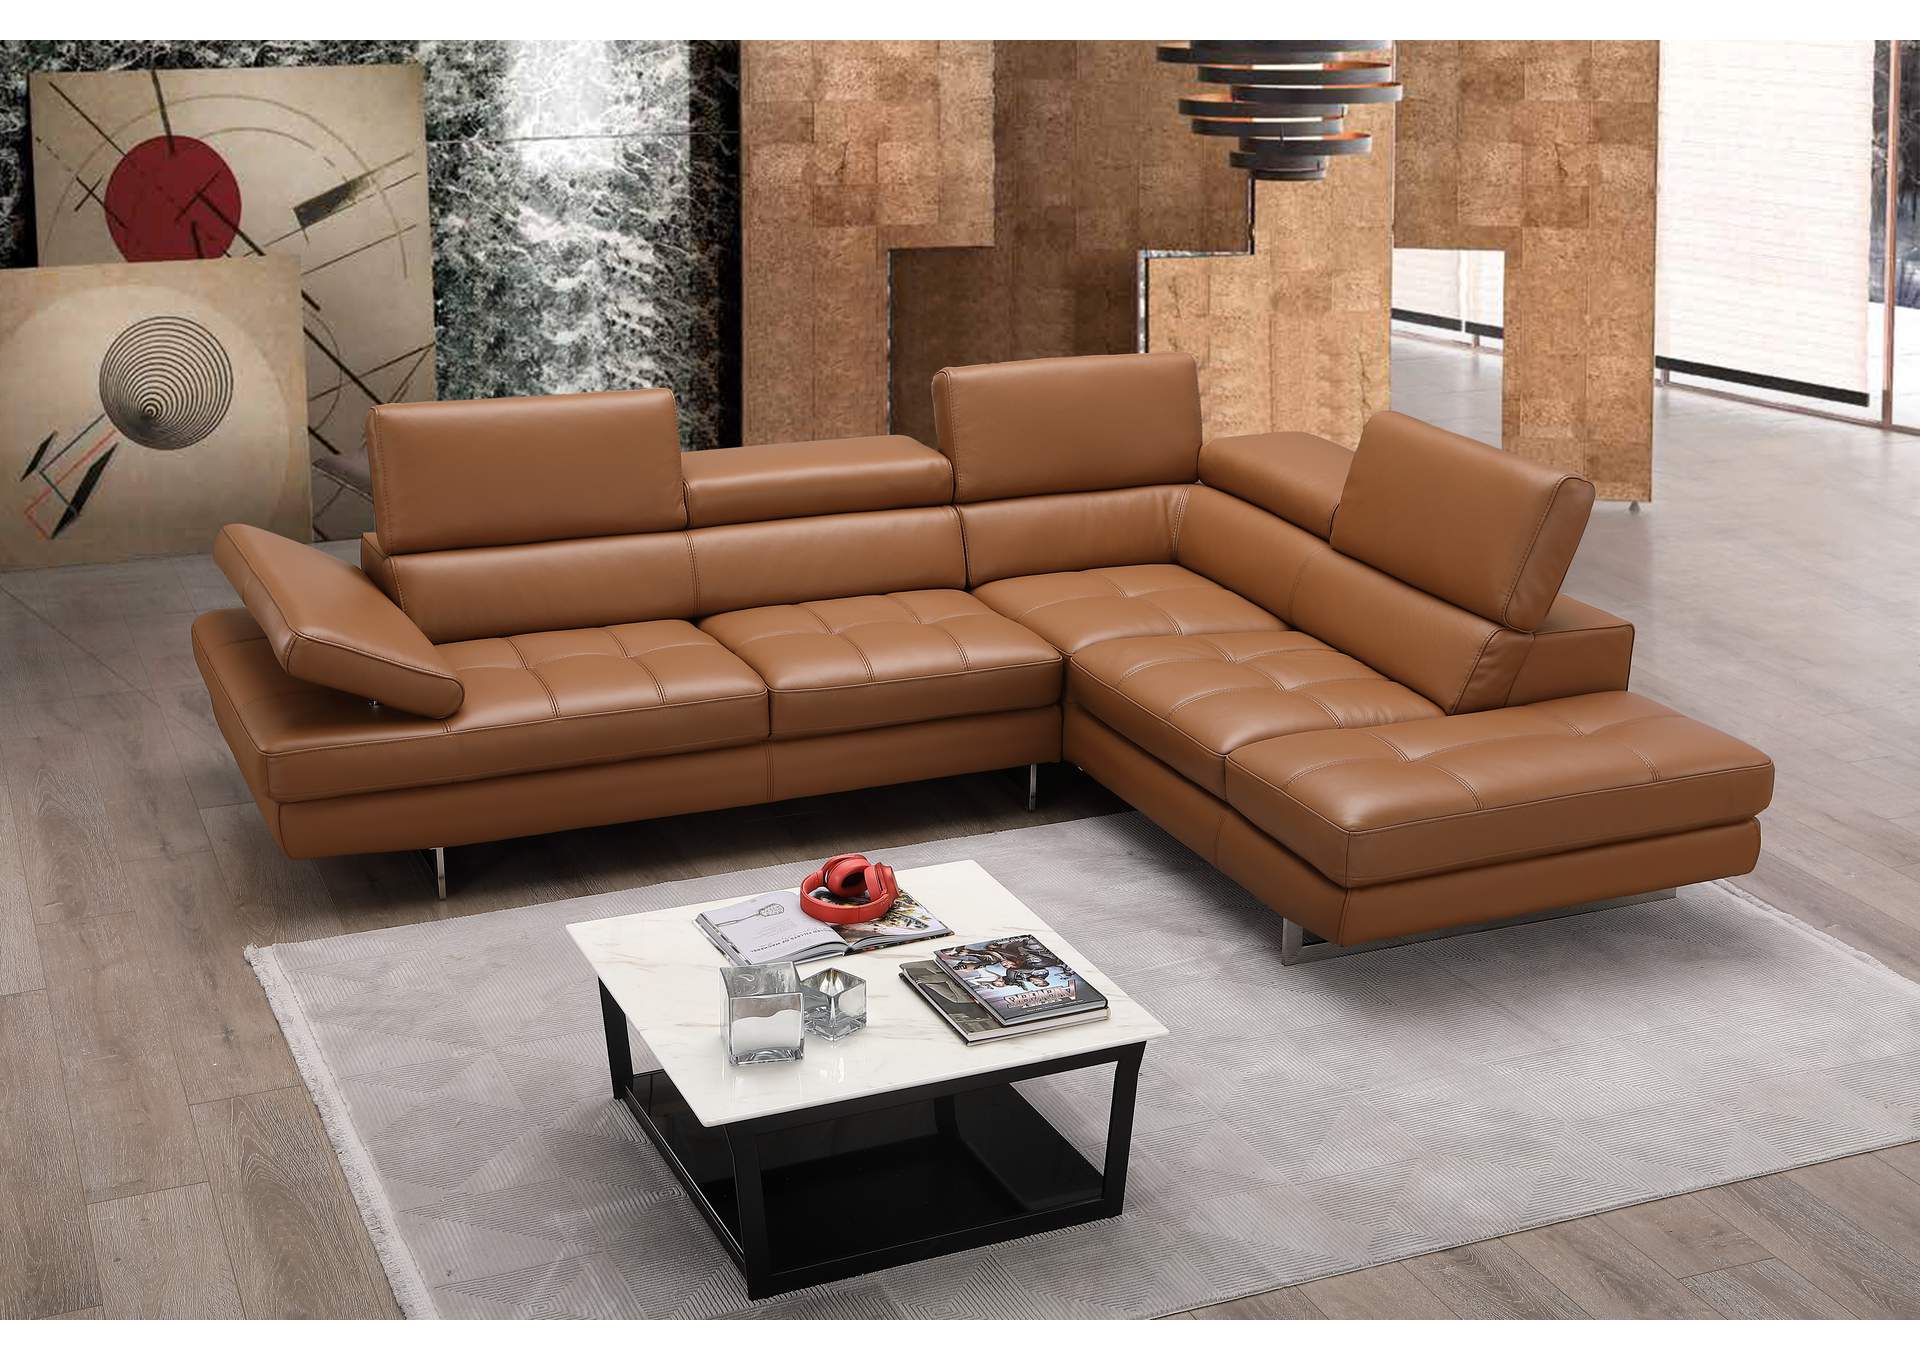 A761 Italian Leather Sectional Caramel, Caramel Leather Sectional